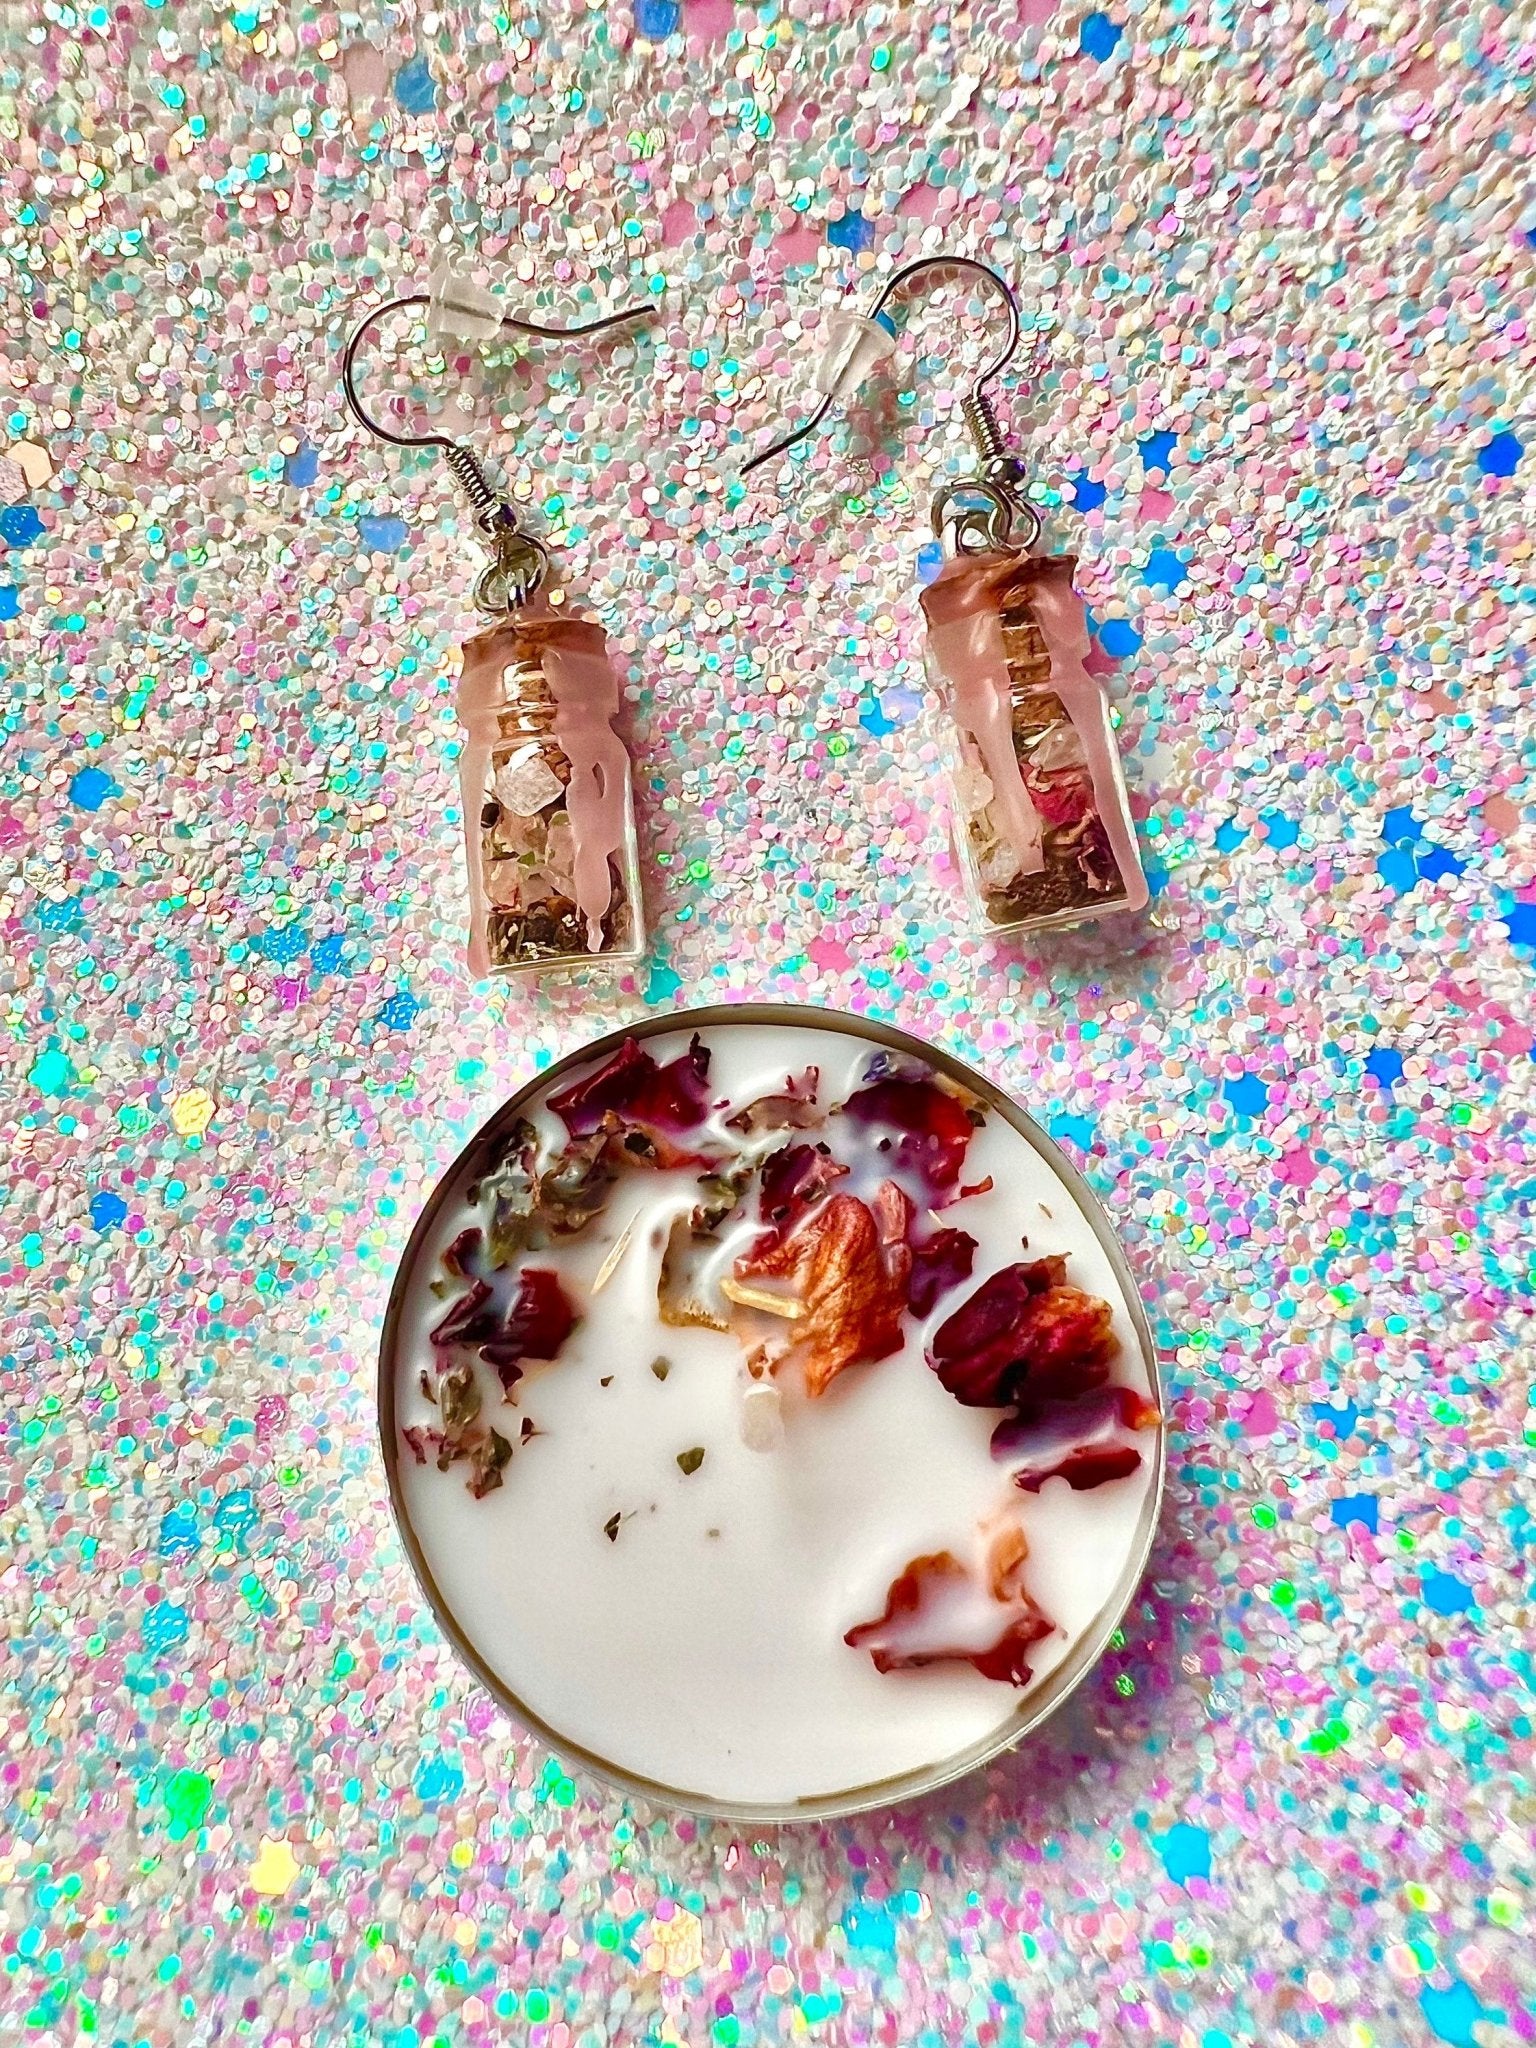 LOVE Spell Jar Earrings - Intention Spell Remove Obstacles In Love - Reconciliation - Positive Love Energy Hoodoo Jewelry Nickel Free - MysticBluuMoonTarot